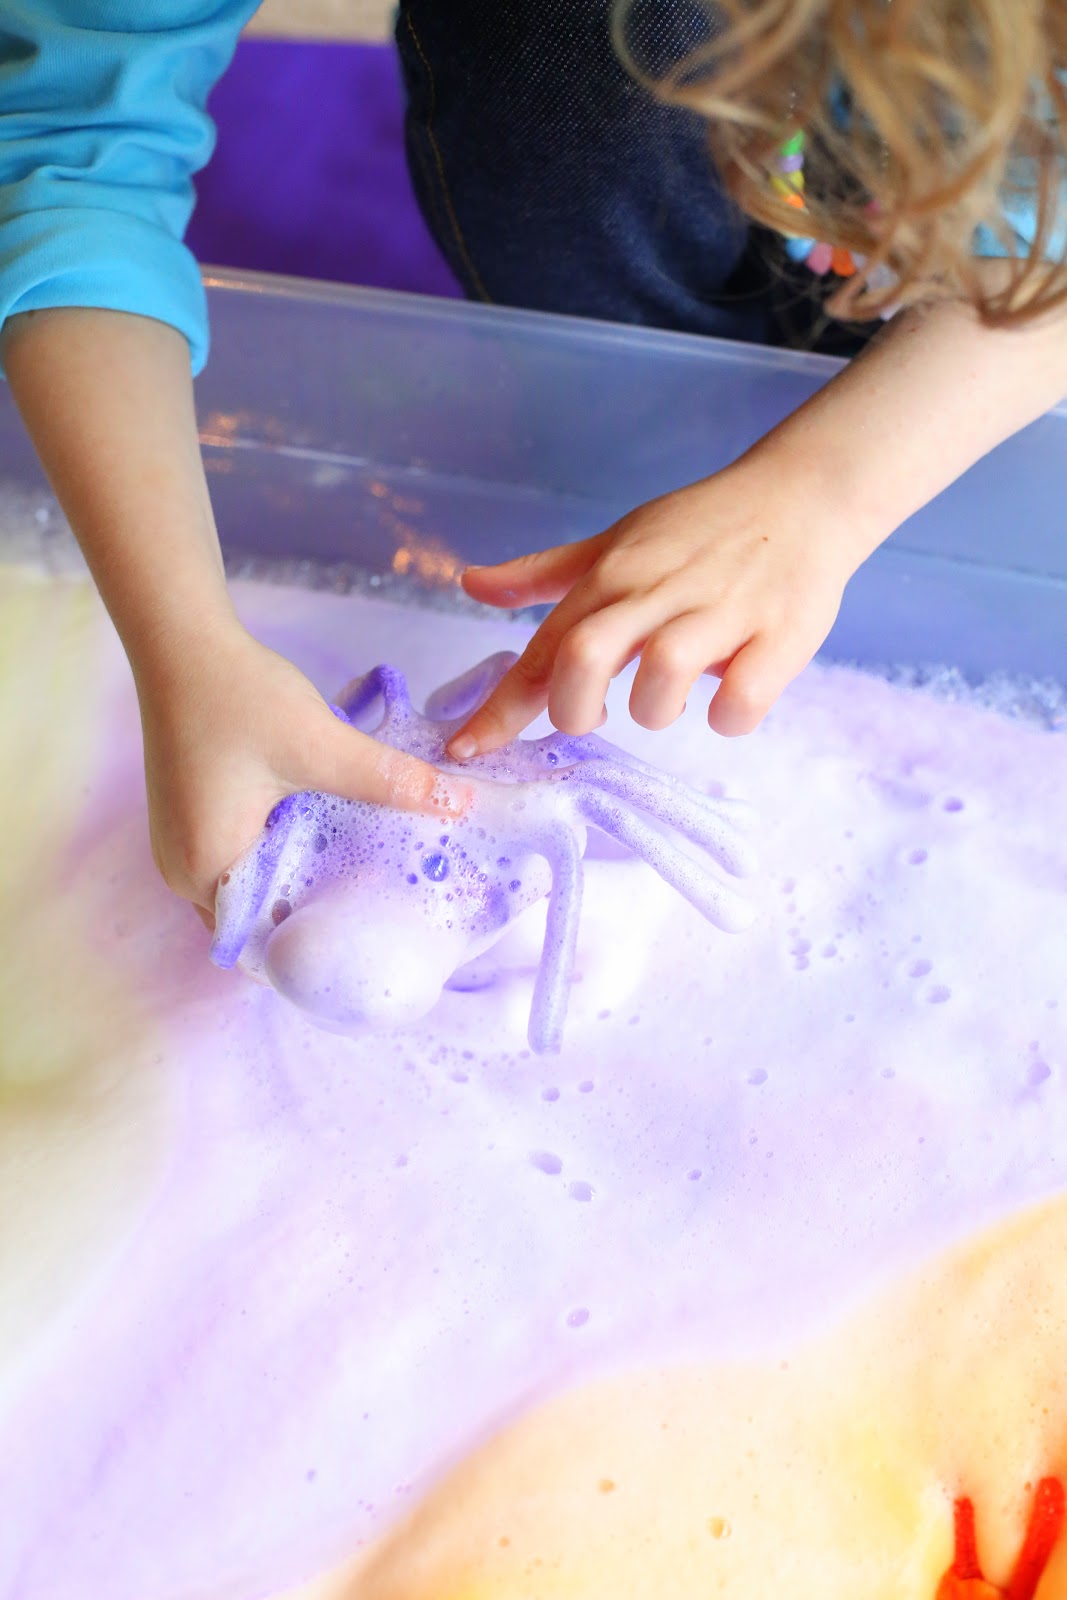 Magic Halloween Foaming Spiders - they shoot out rays of colored soap foam and disappear into a mound of fluffy colored foam, leaving baby spiders behind.  From Fun at Home with Kids